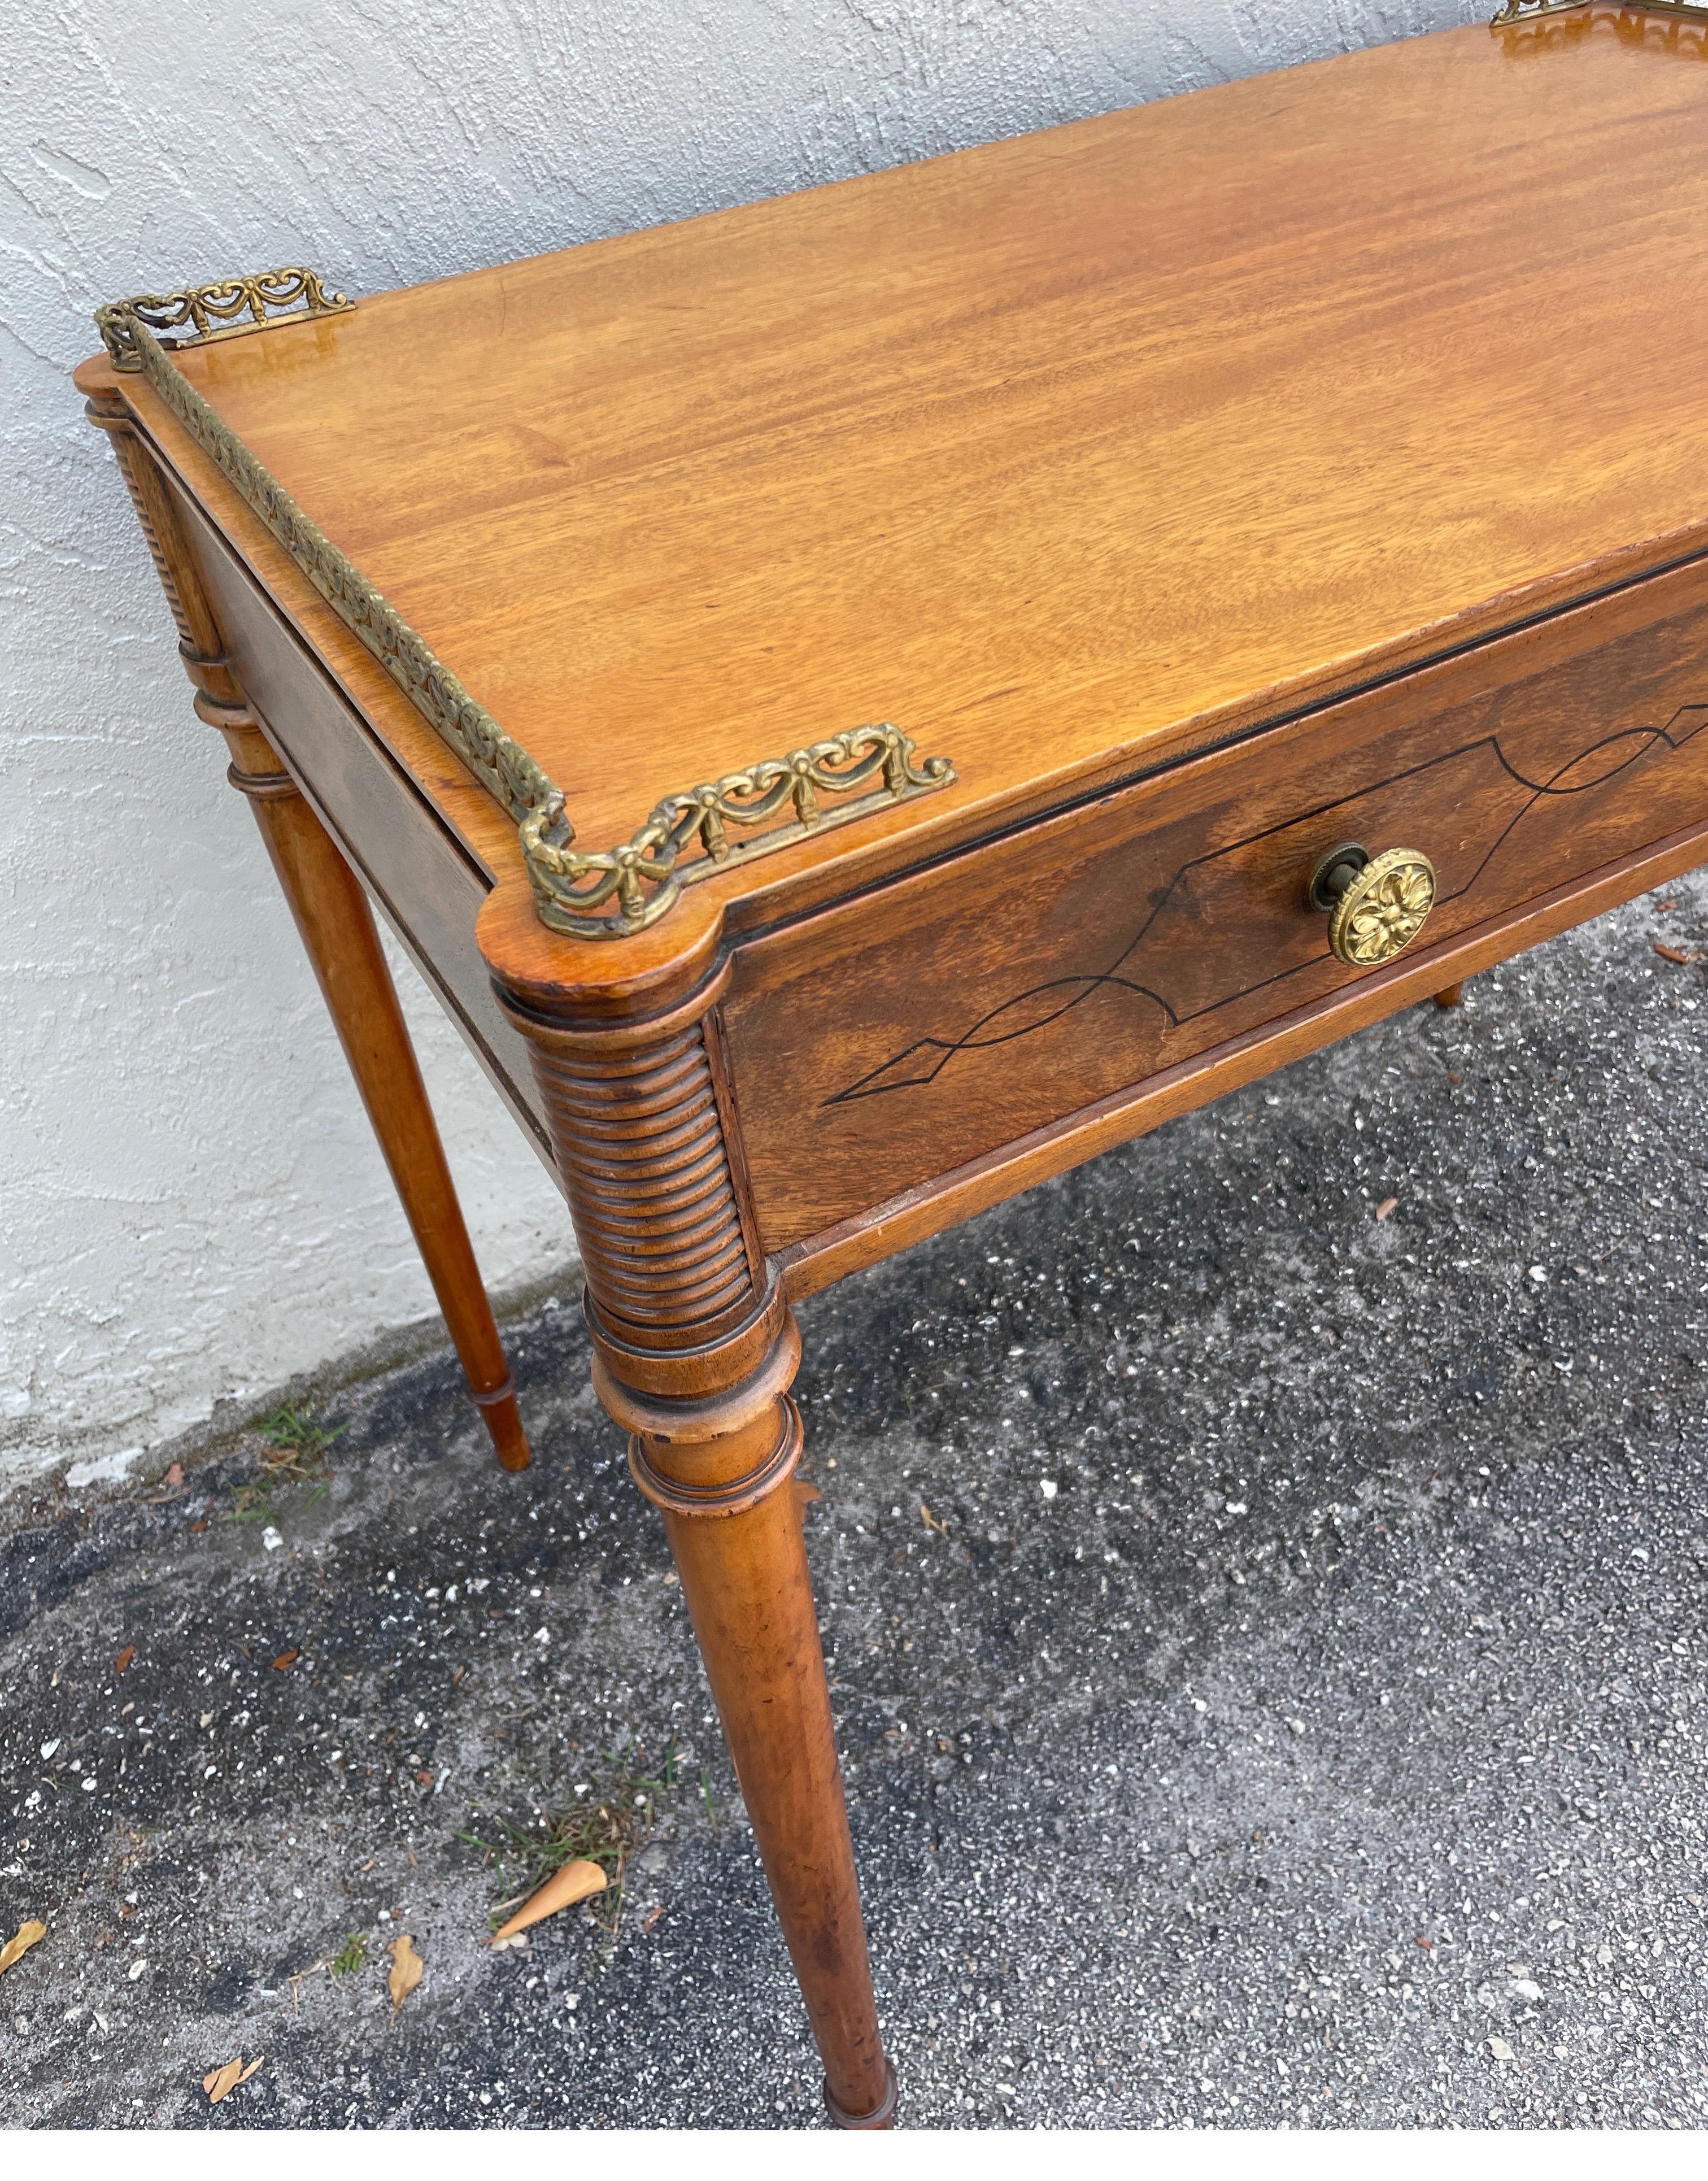 Mahogany Vintage Regency Style Galleried Partners Desk / Server with Turret Corners For Sale